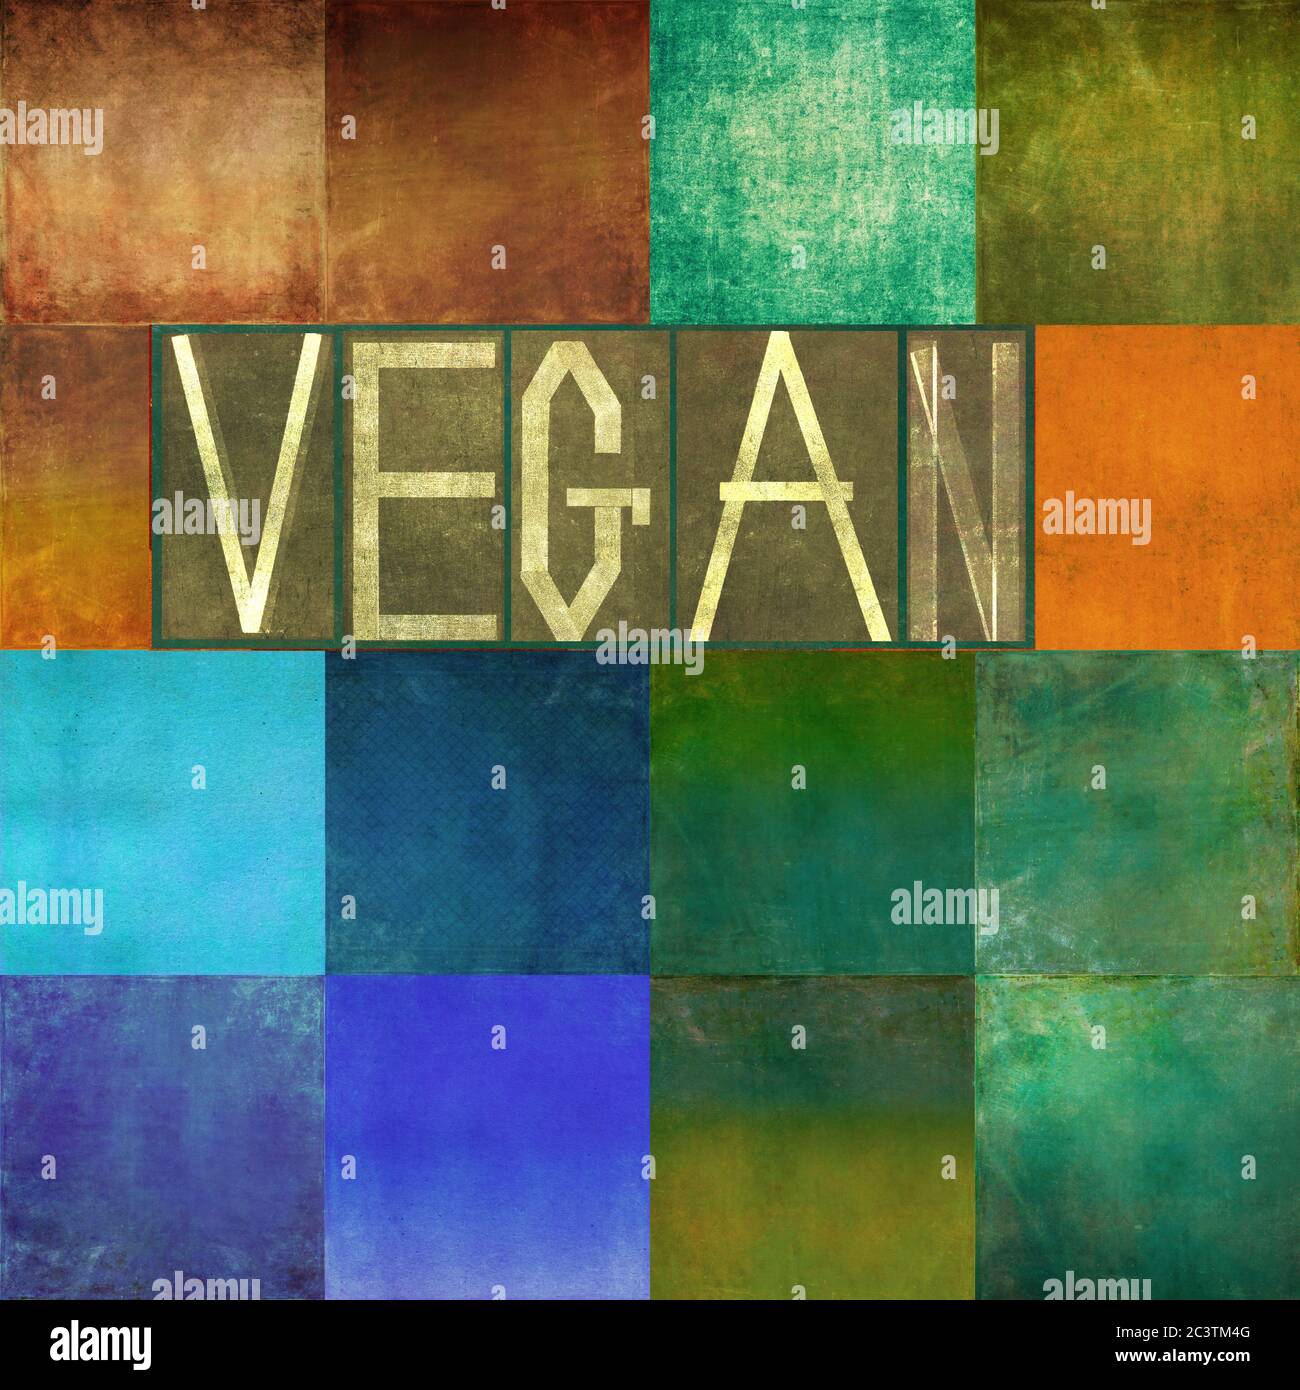 Textured background image and useful design element displaying the word 'Vegan' Stock Photo